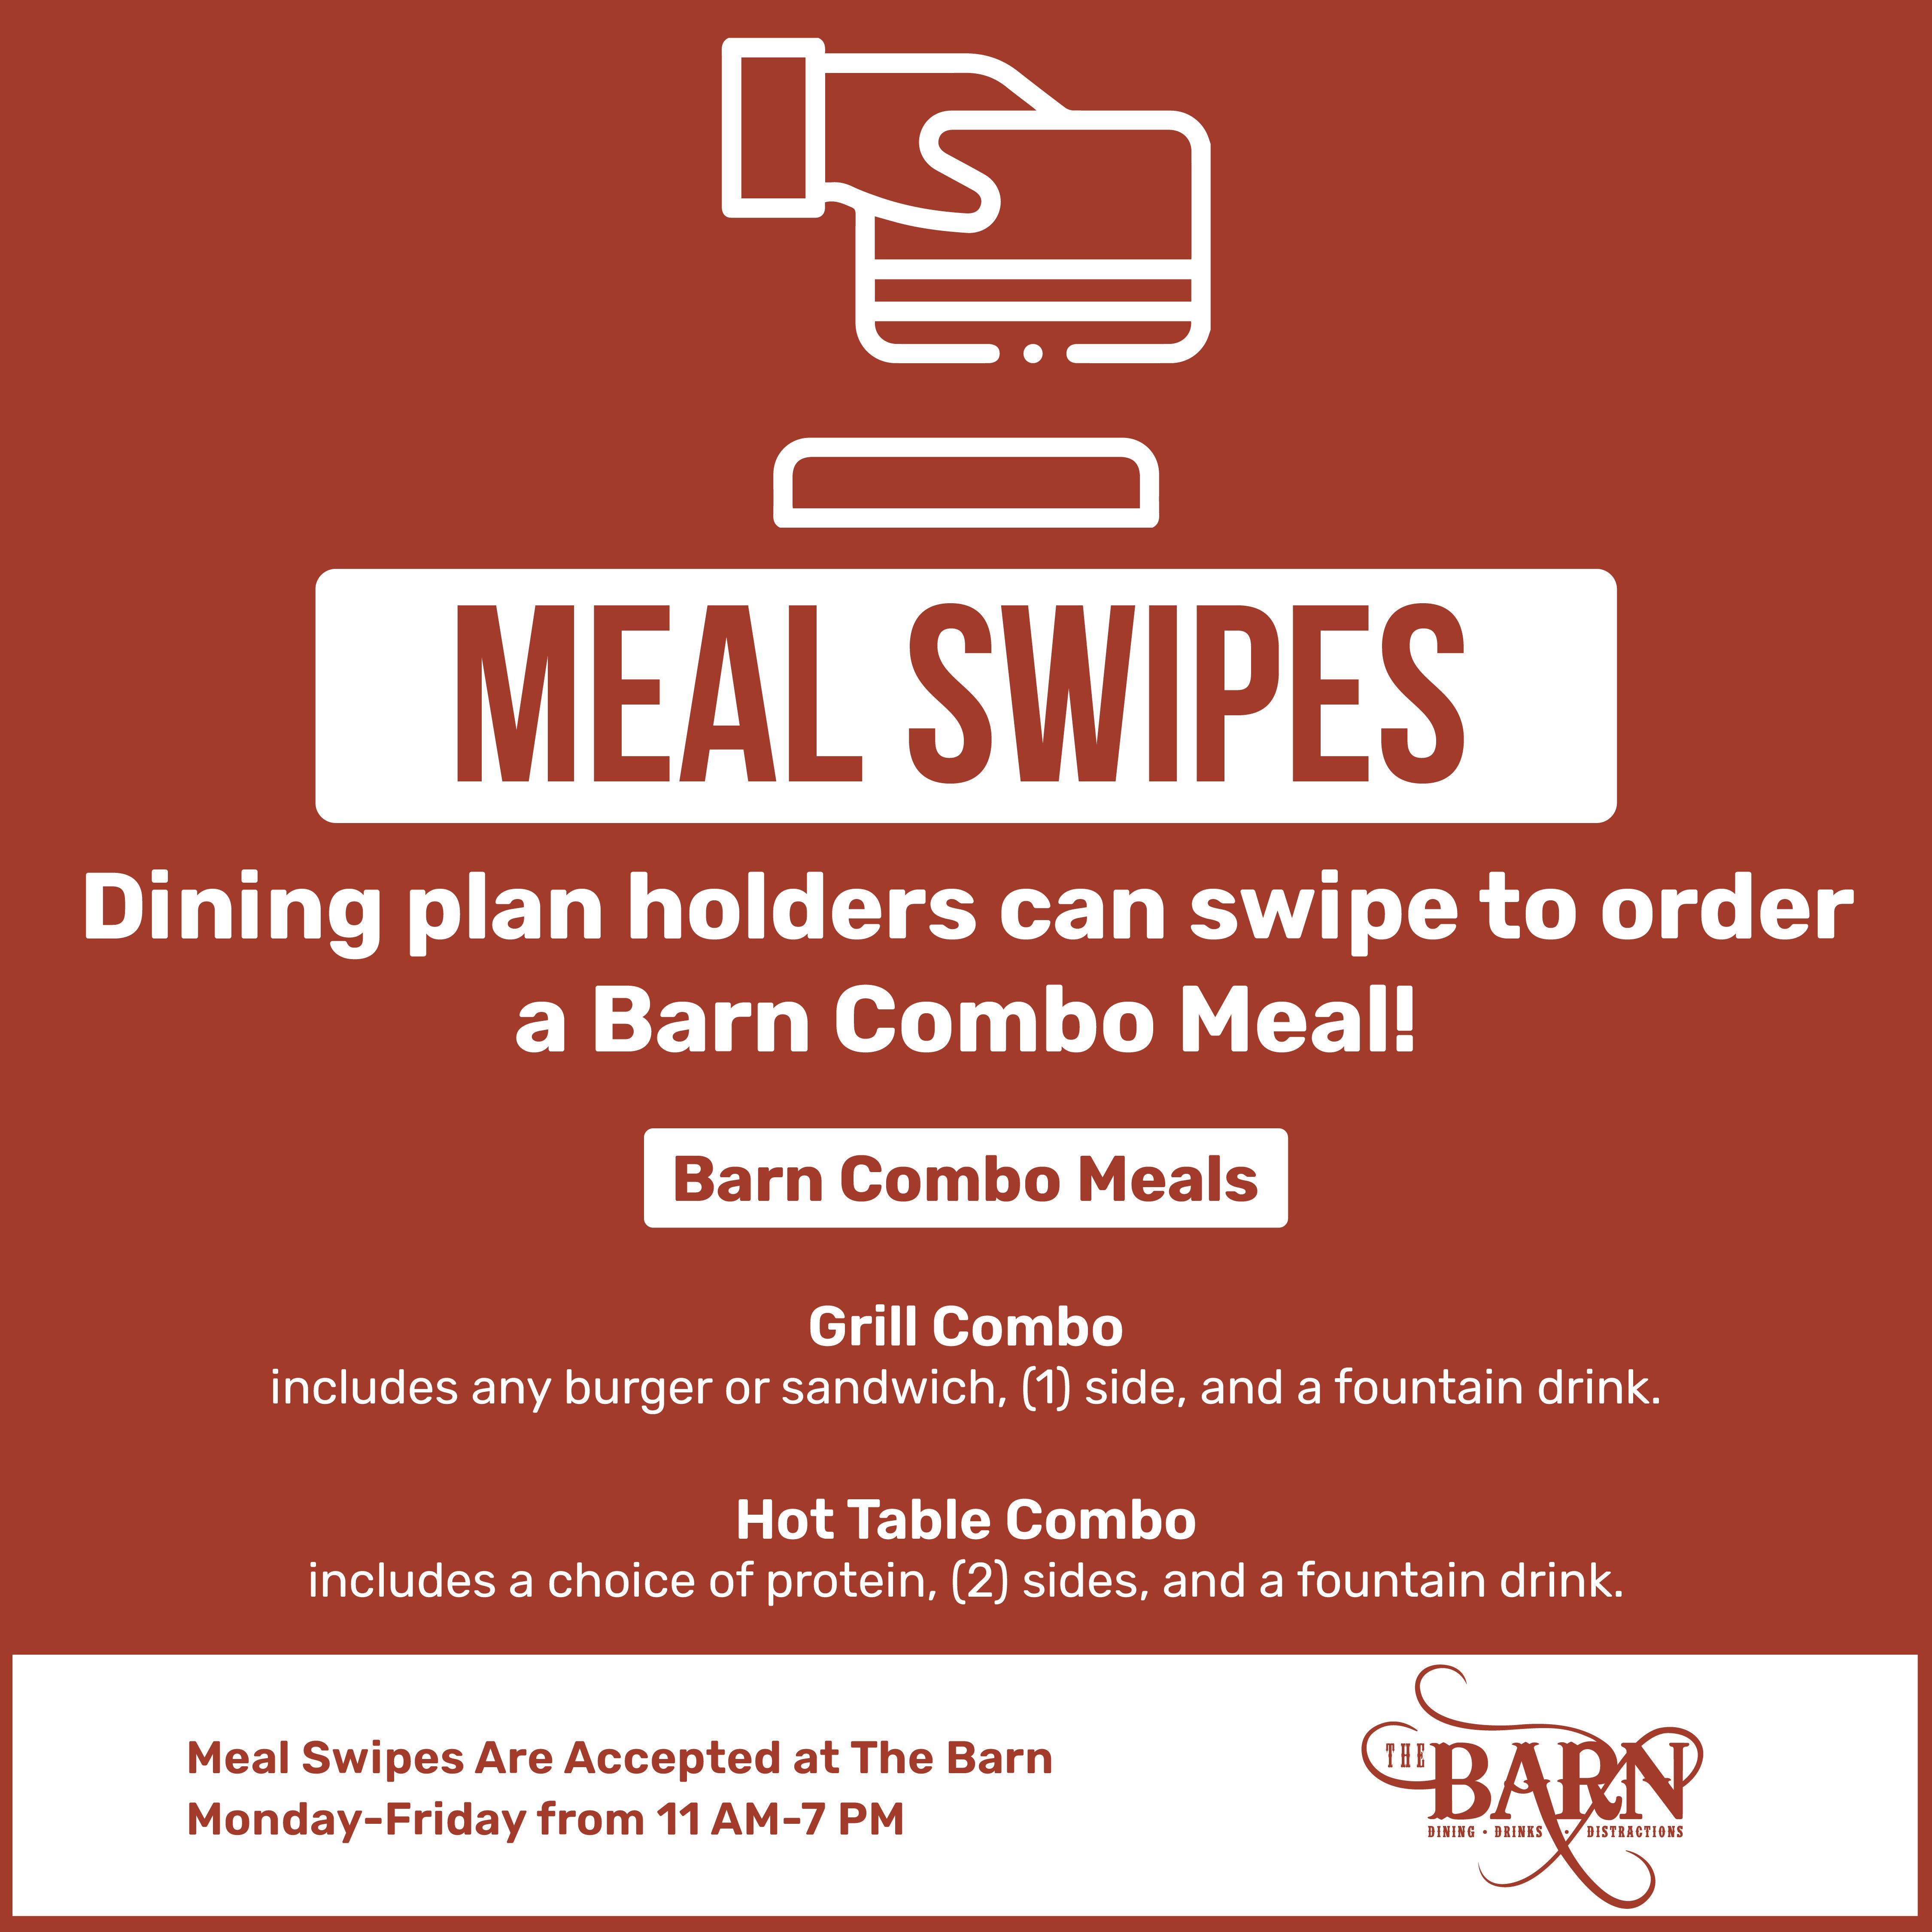 The Barn Takes Meal Swipes